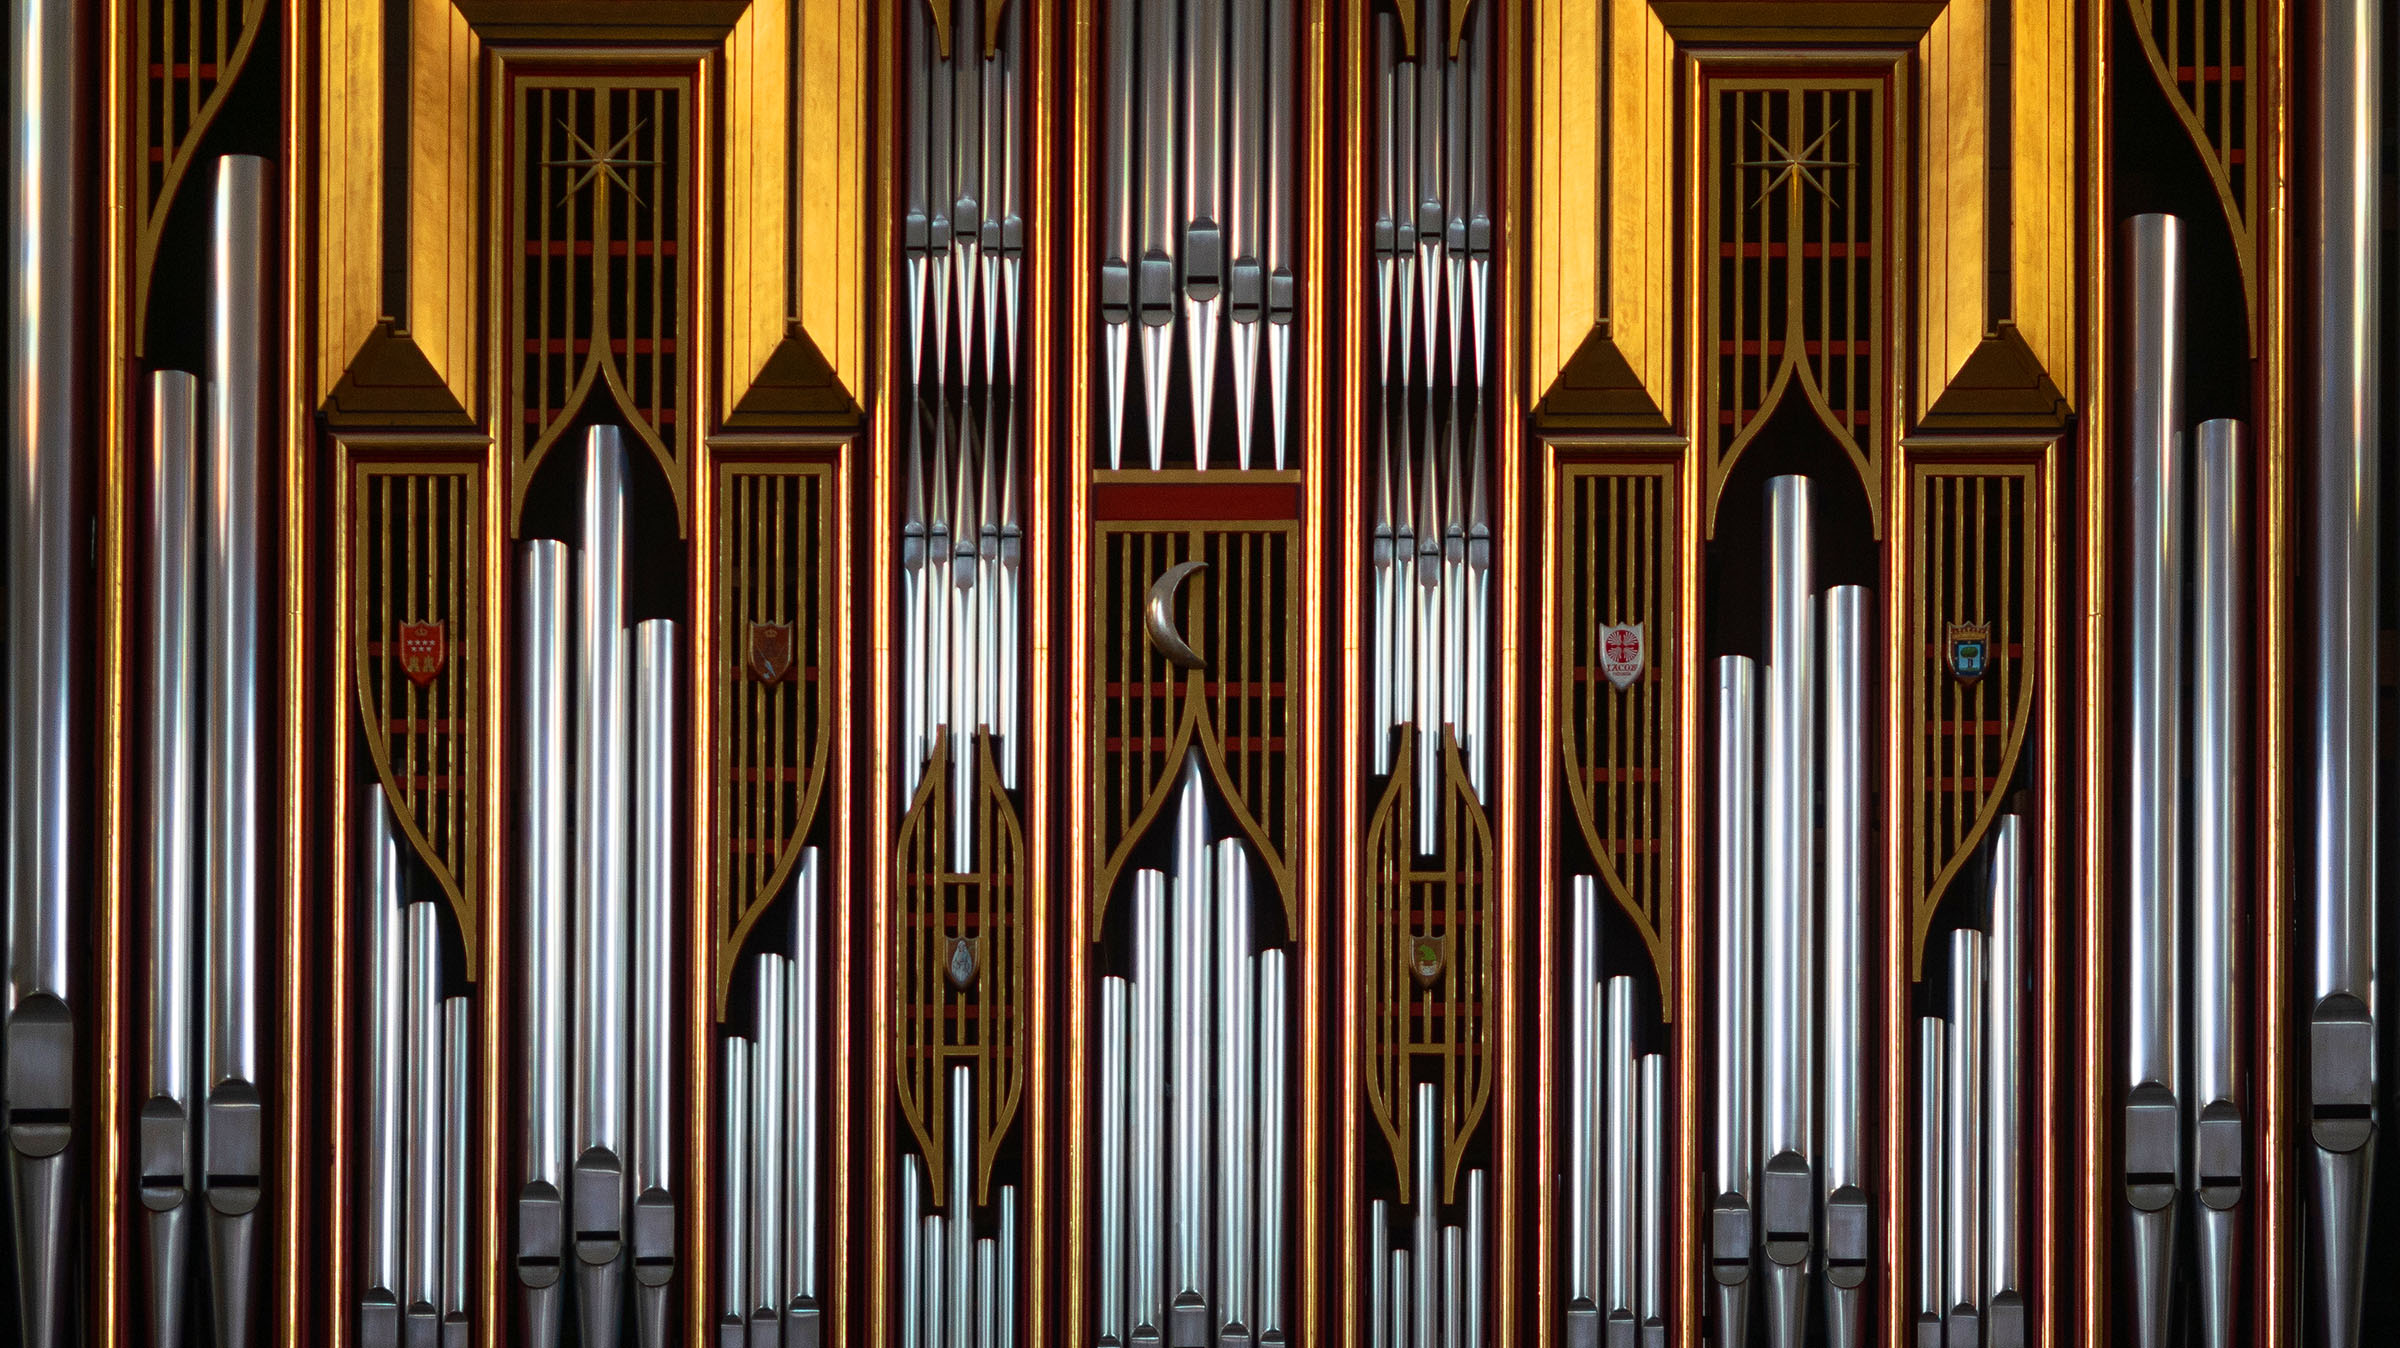 Image of the Pipe organ in Almudena cathedral, Madrid, Spain.